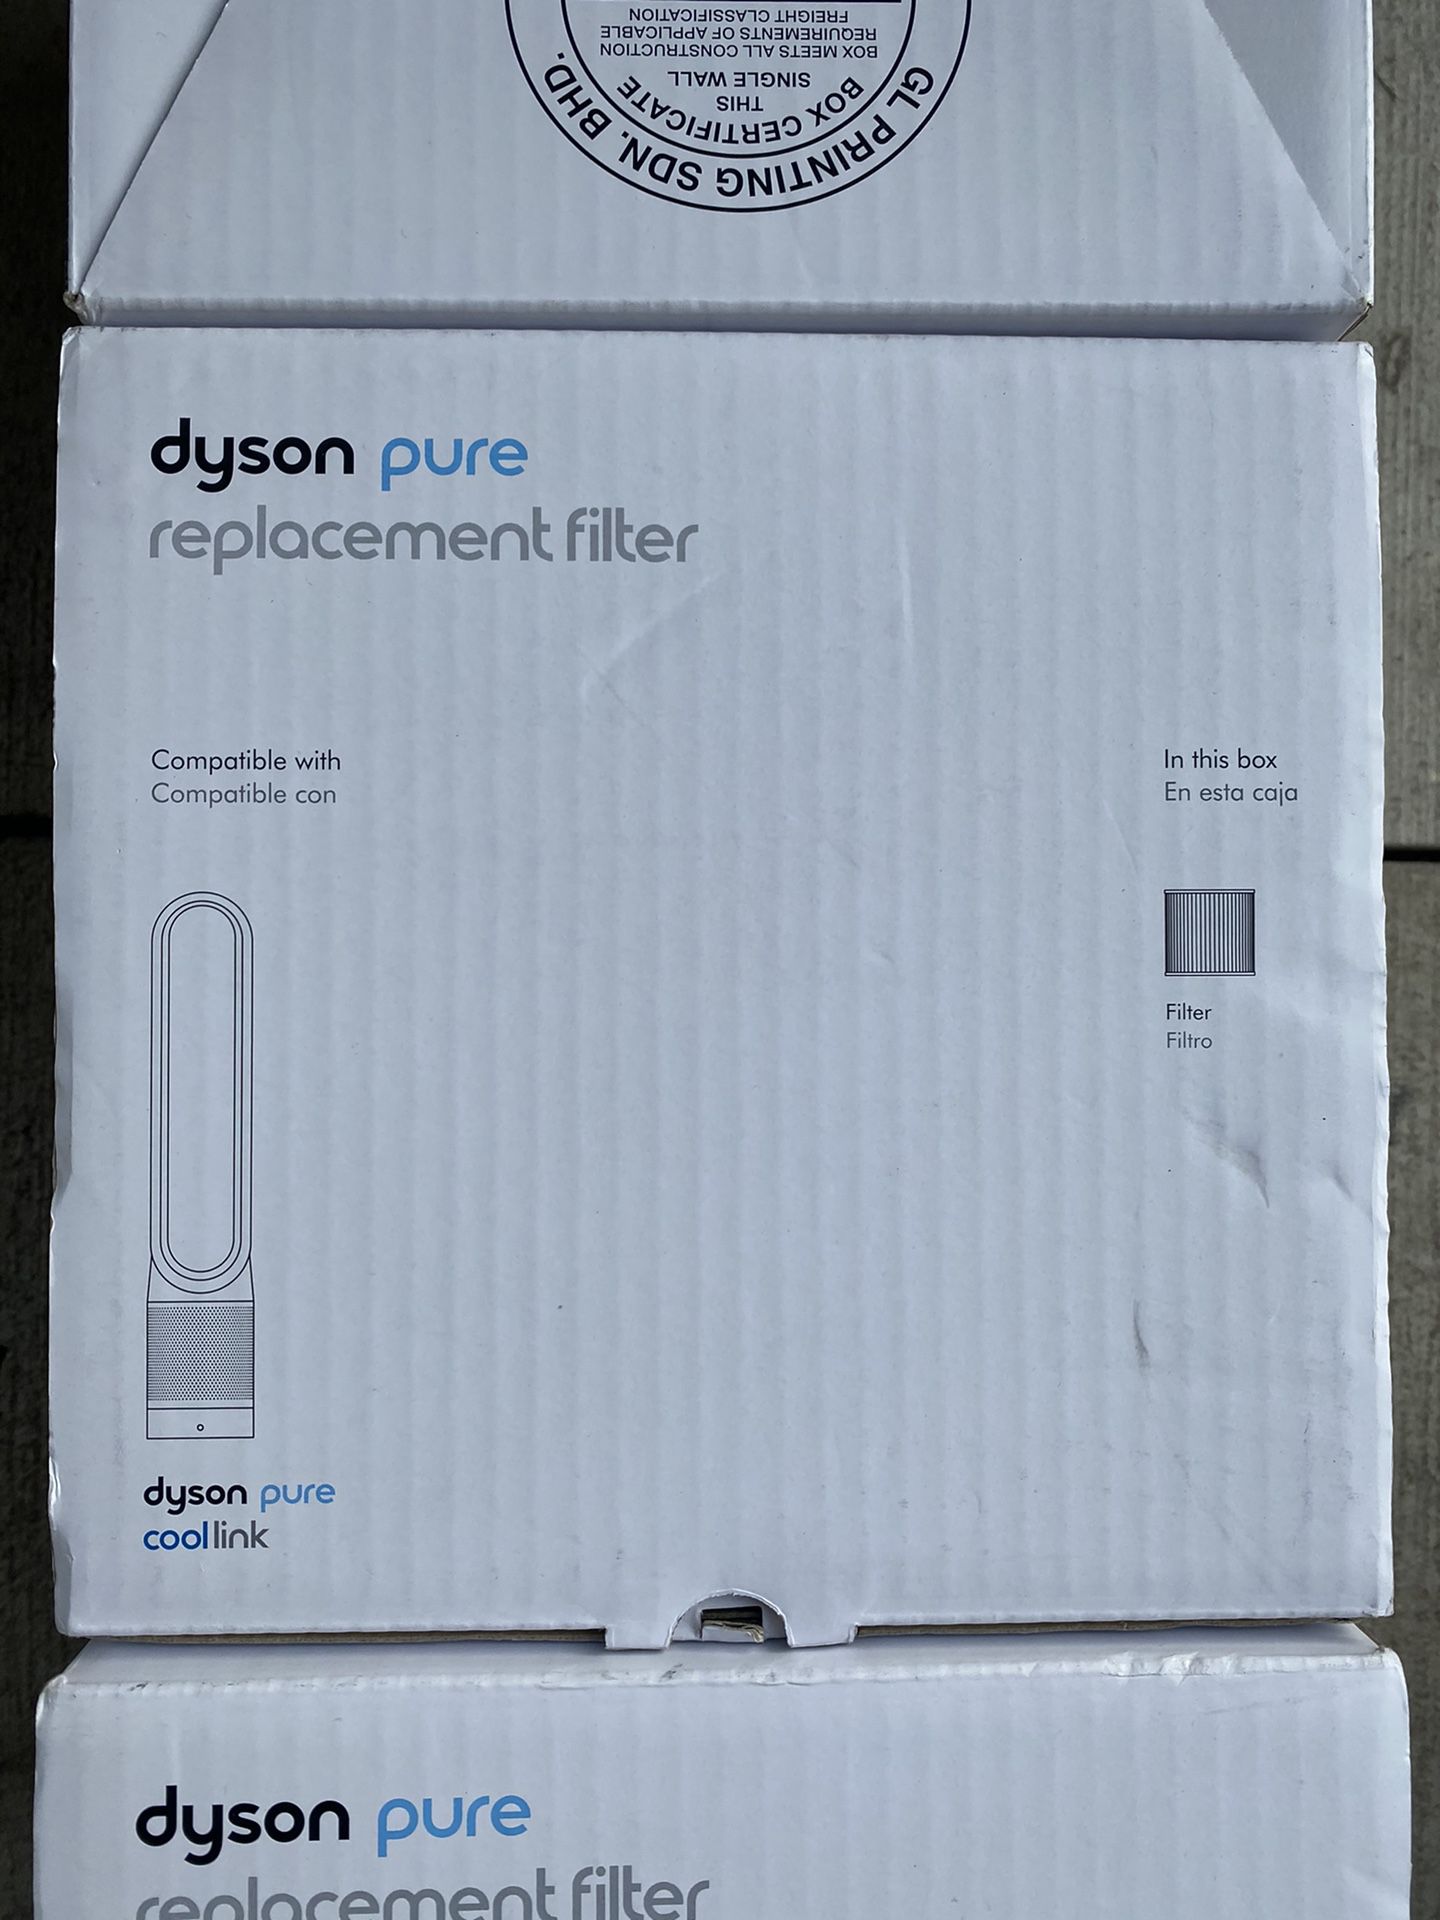 Dyson pure replacement filter